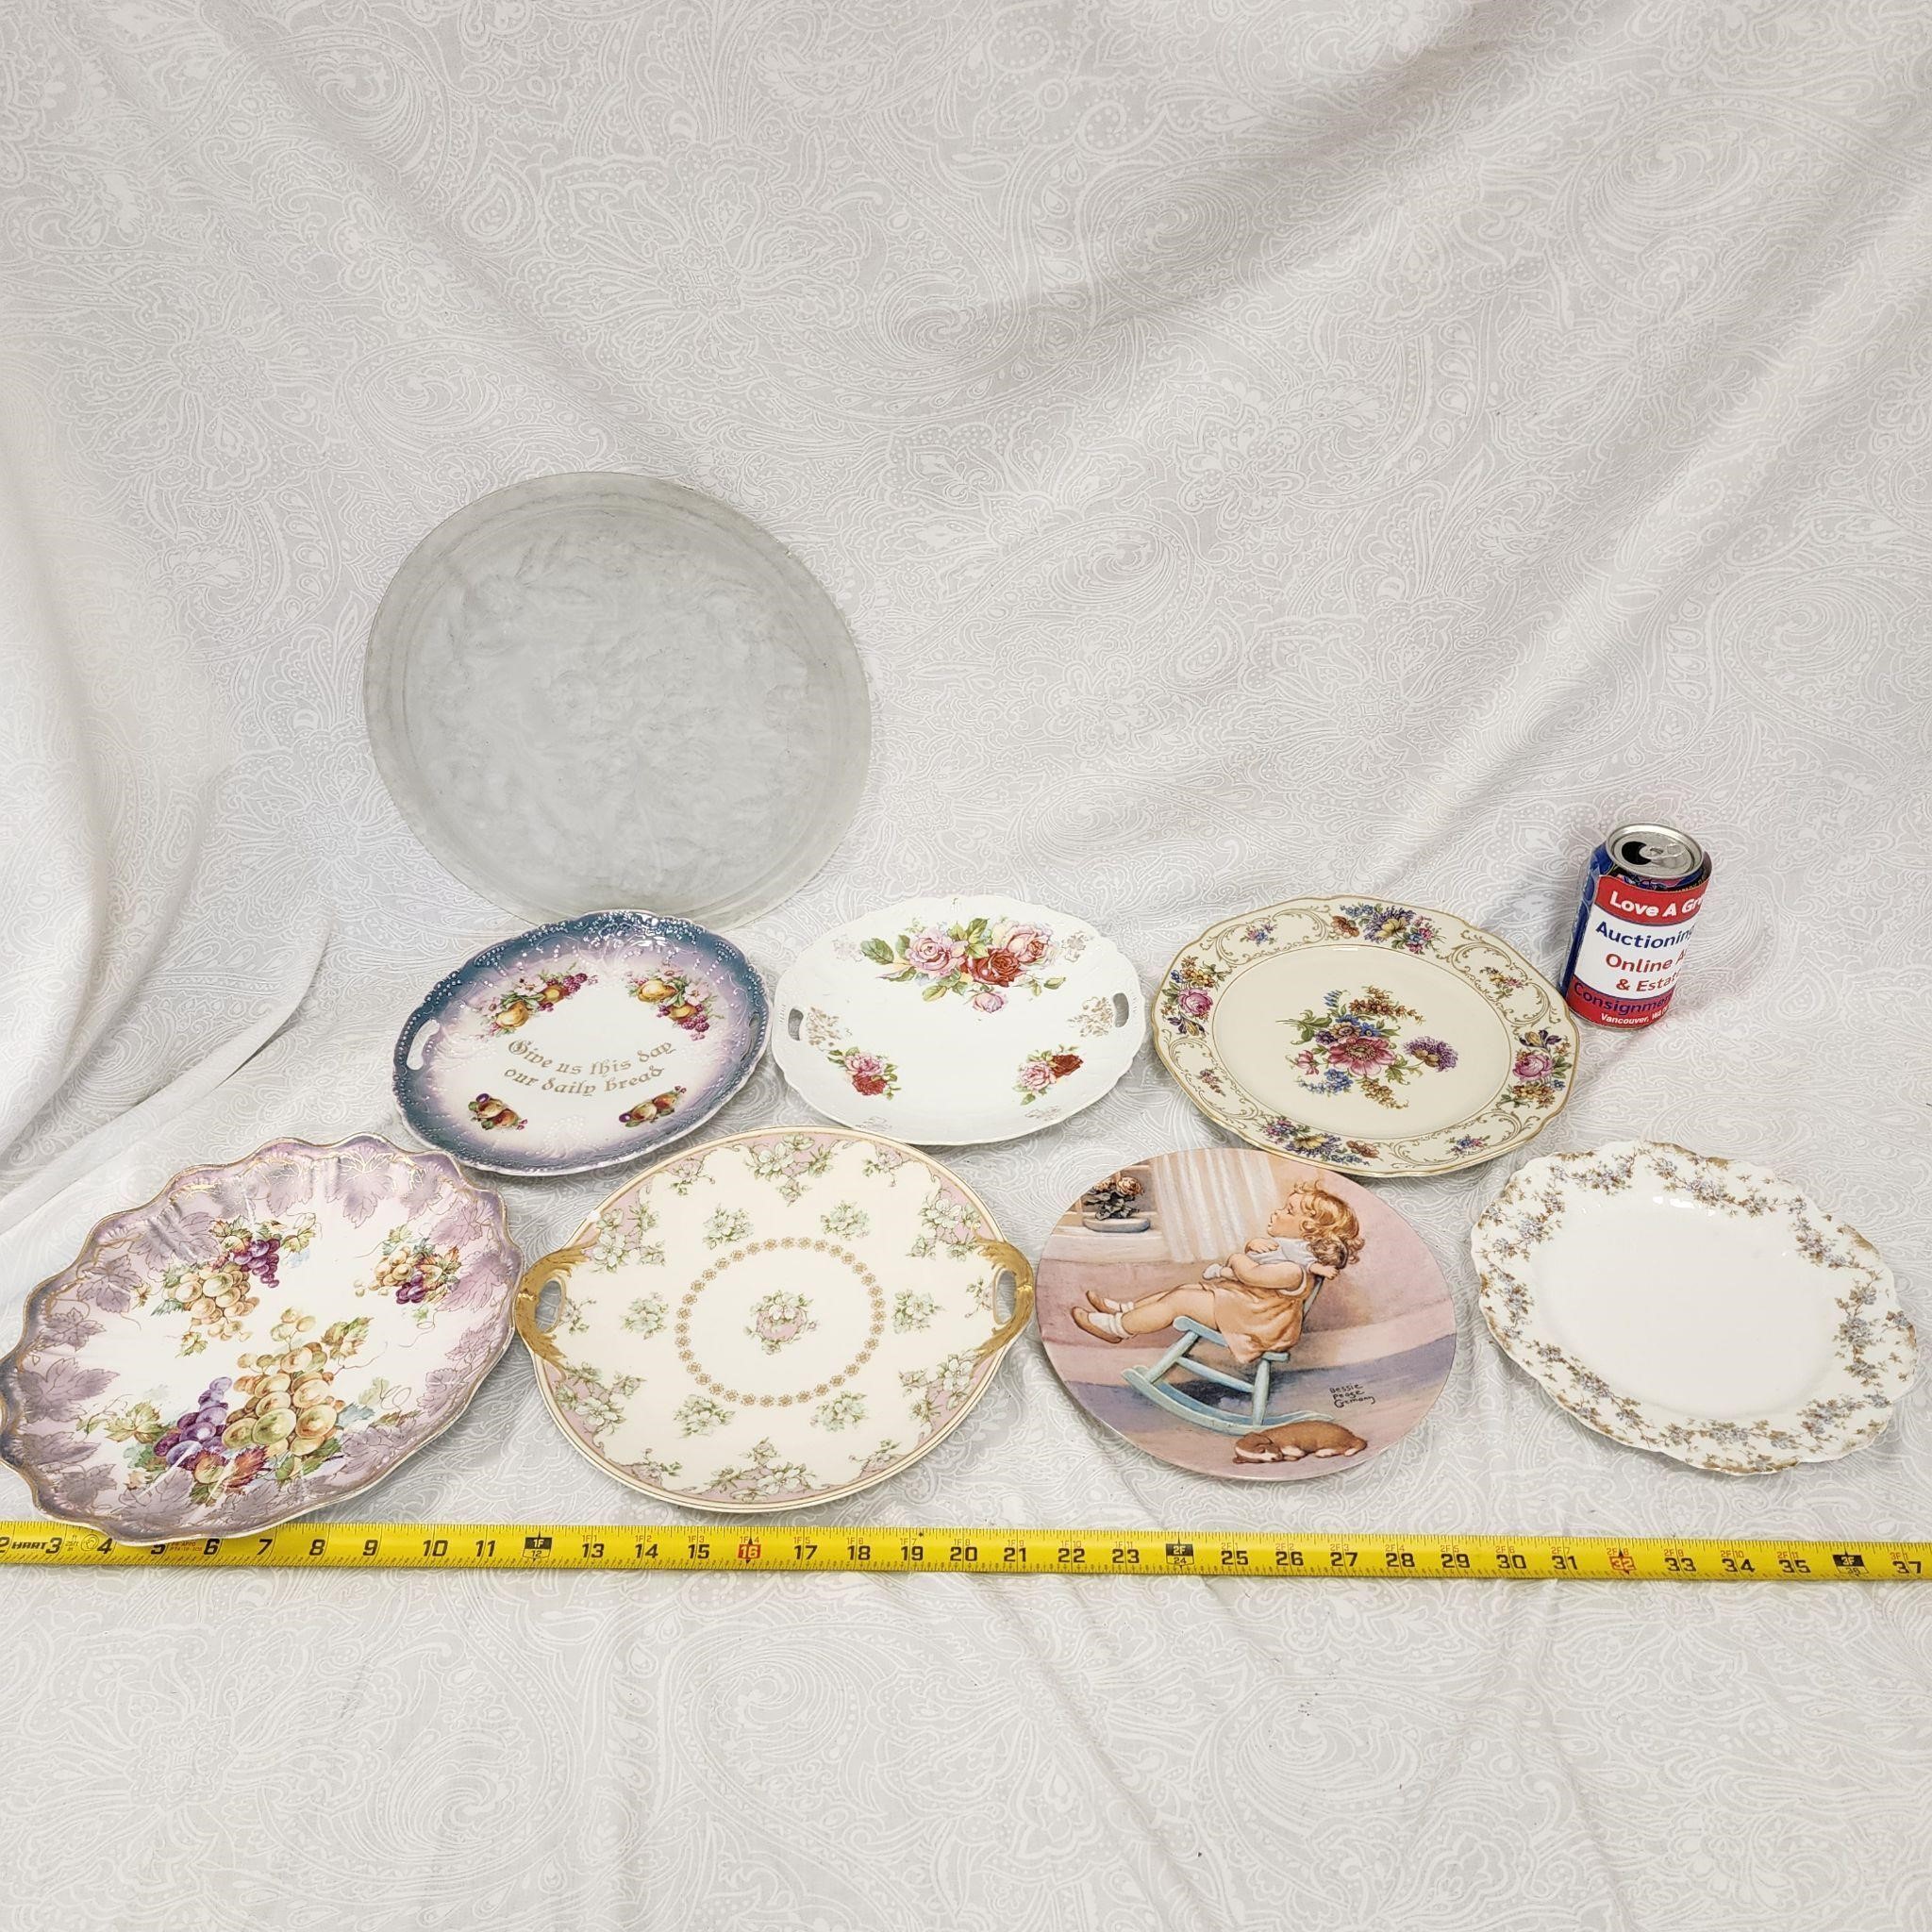 Variety Of Vintage Plates & Wall Decor